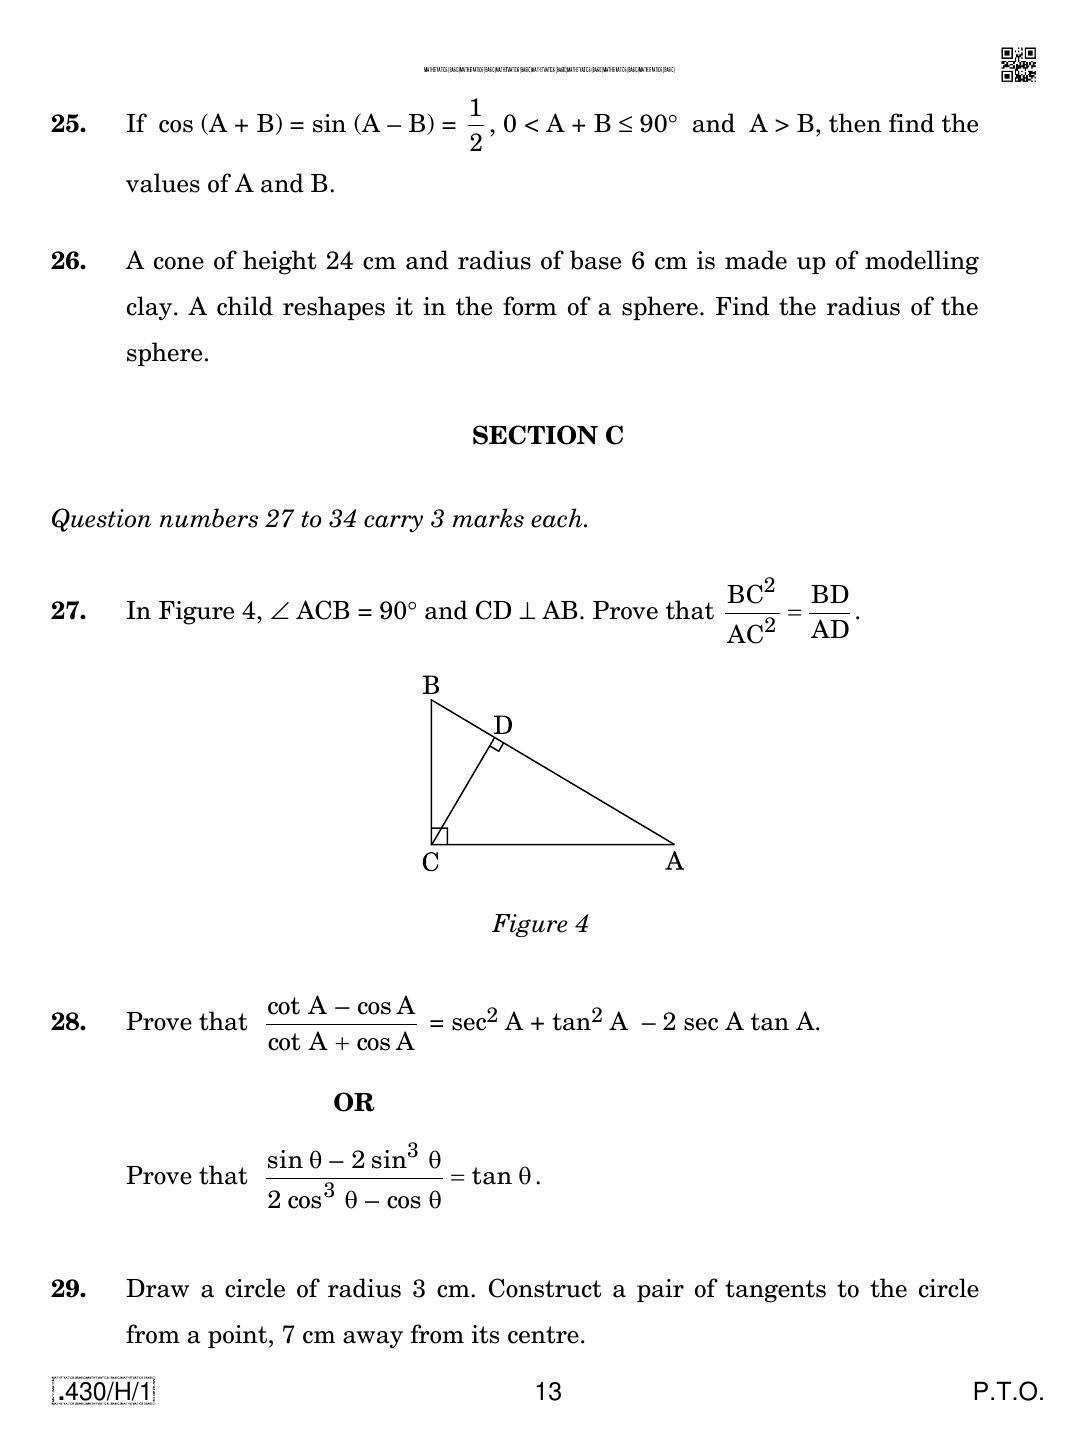 CBSE Class 10 430-C-1 - Maths (Basic) 2020 Compartment Question Paper - Page 13